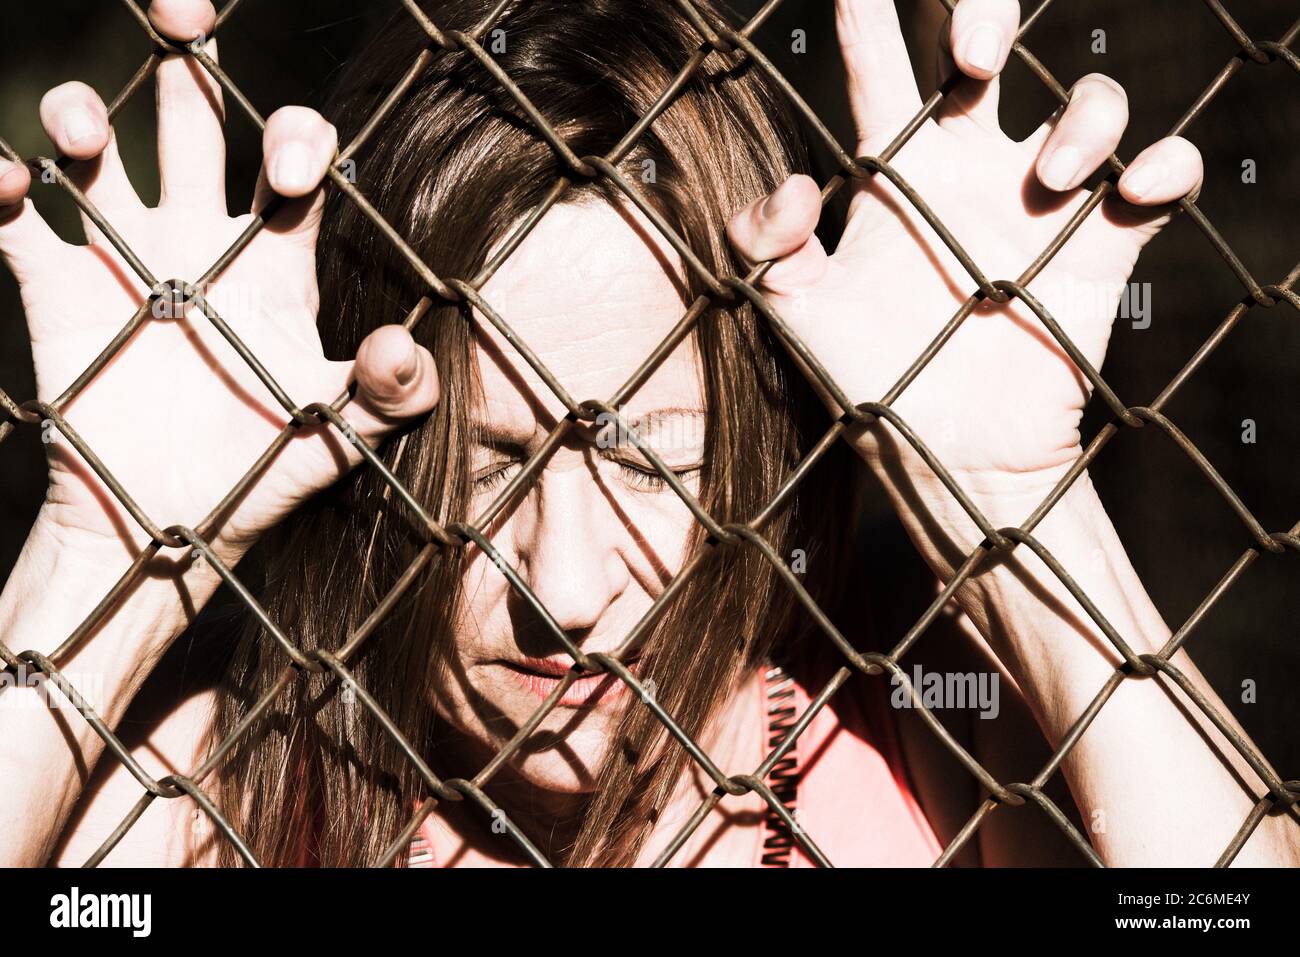 Filtered image Portrait of devastated, stressed mature woman with closed eyes and hands gripped on behind mesh wire fence Stock Photo